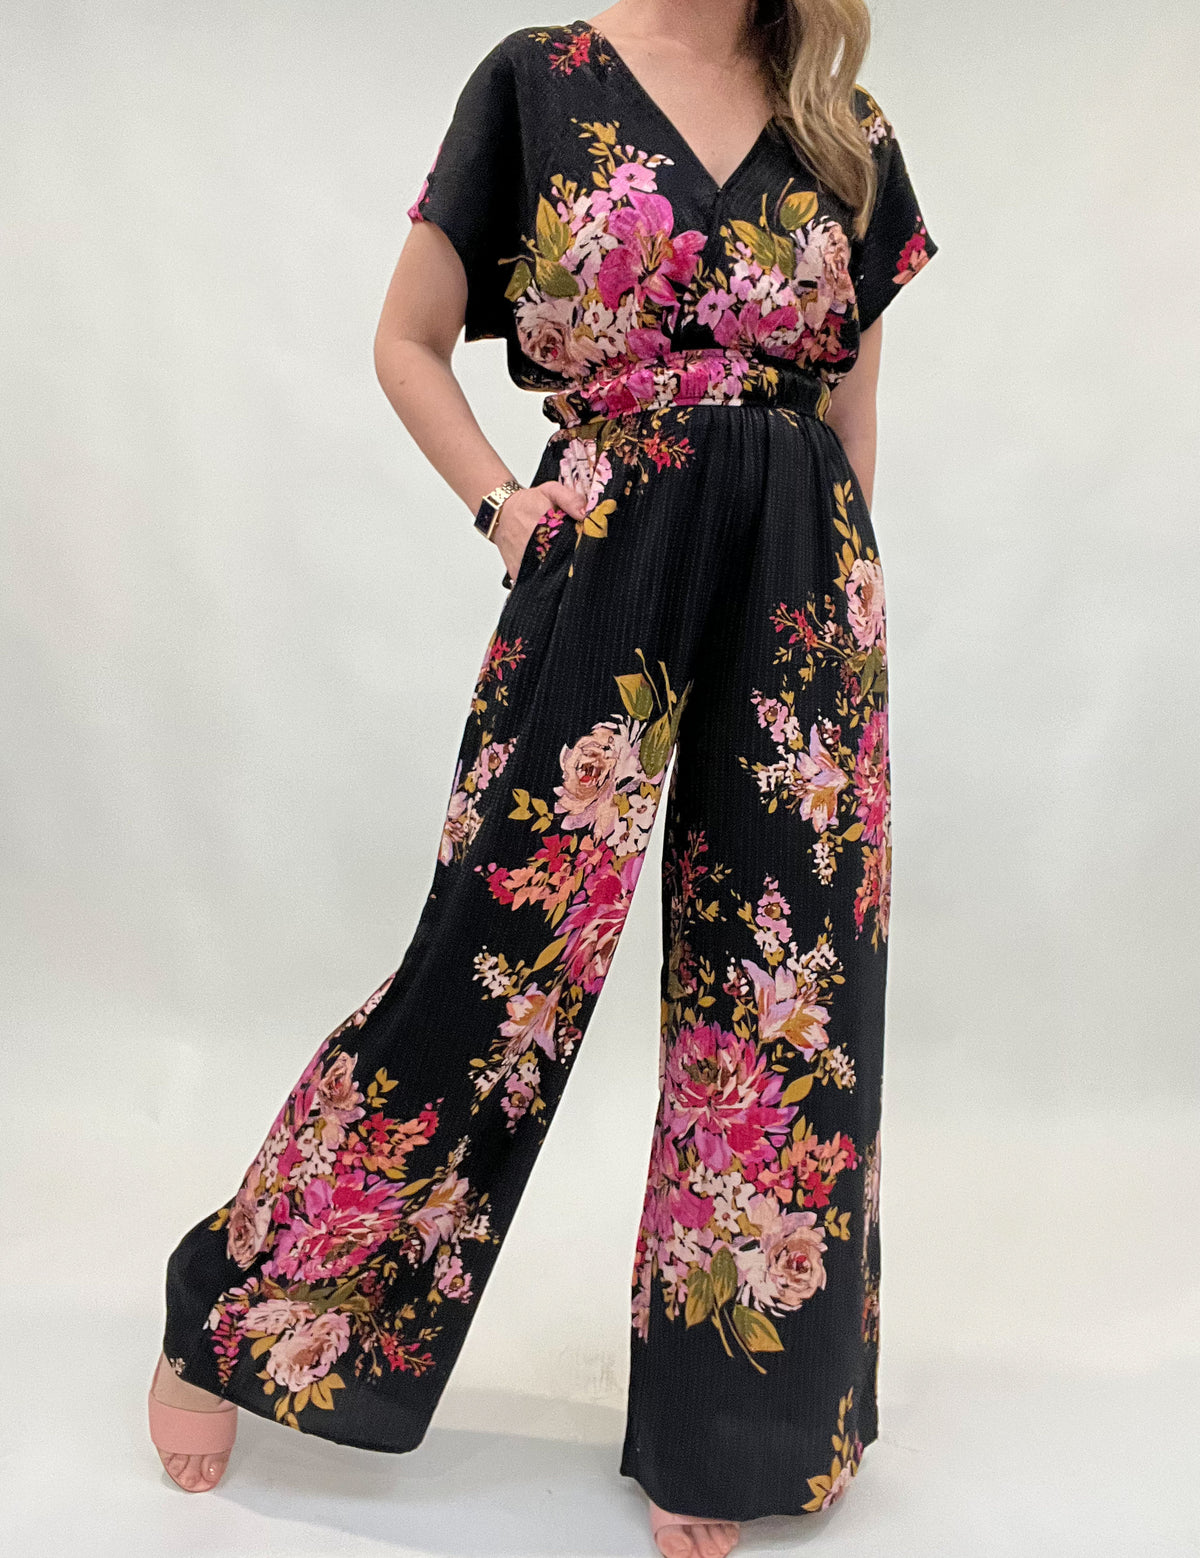 Effortlessly Stylish Flowy Pants for a Bohemian Vibe